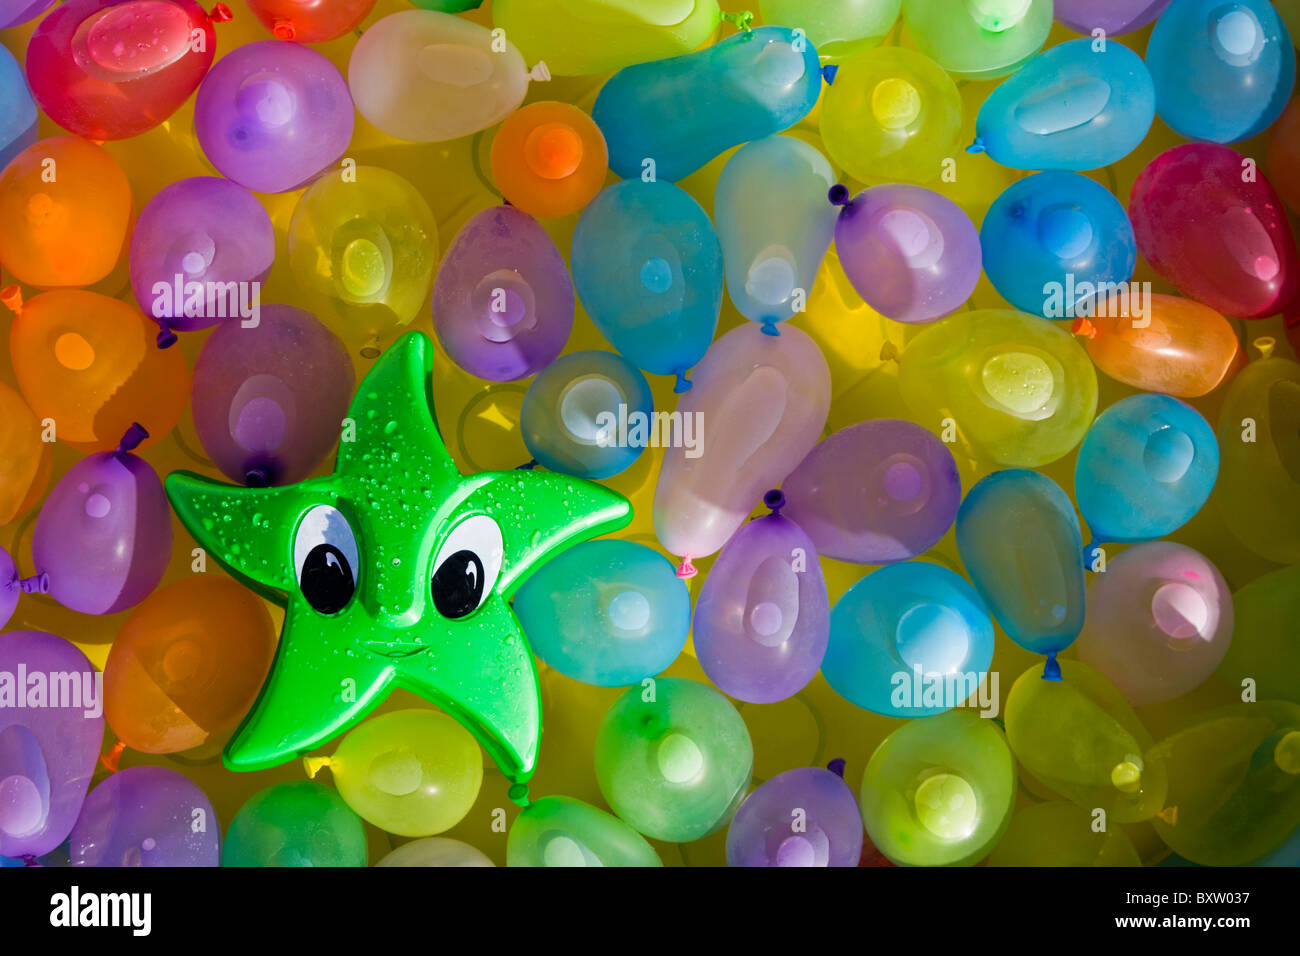 Green toy star with eyes floating between colored water filled ballons Stock Photo